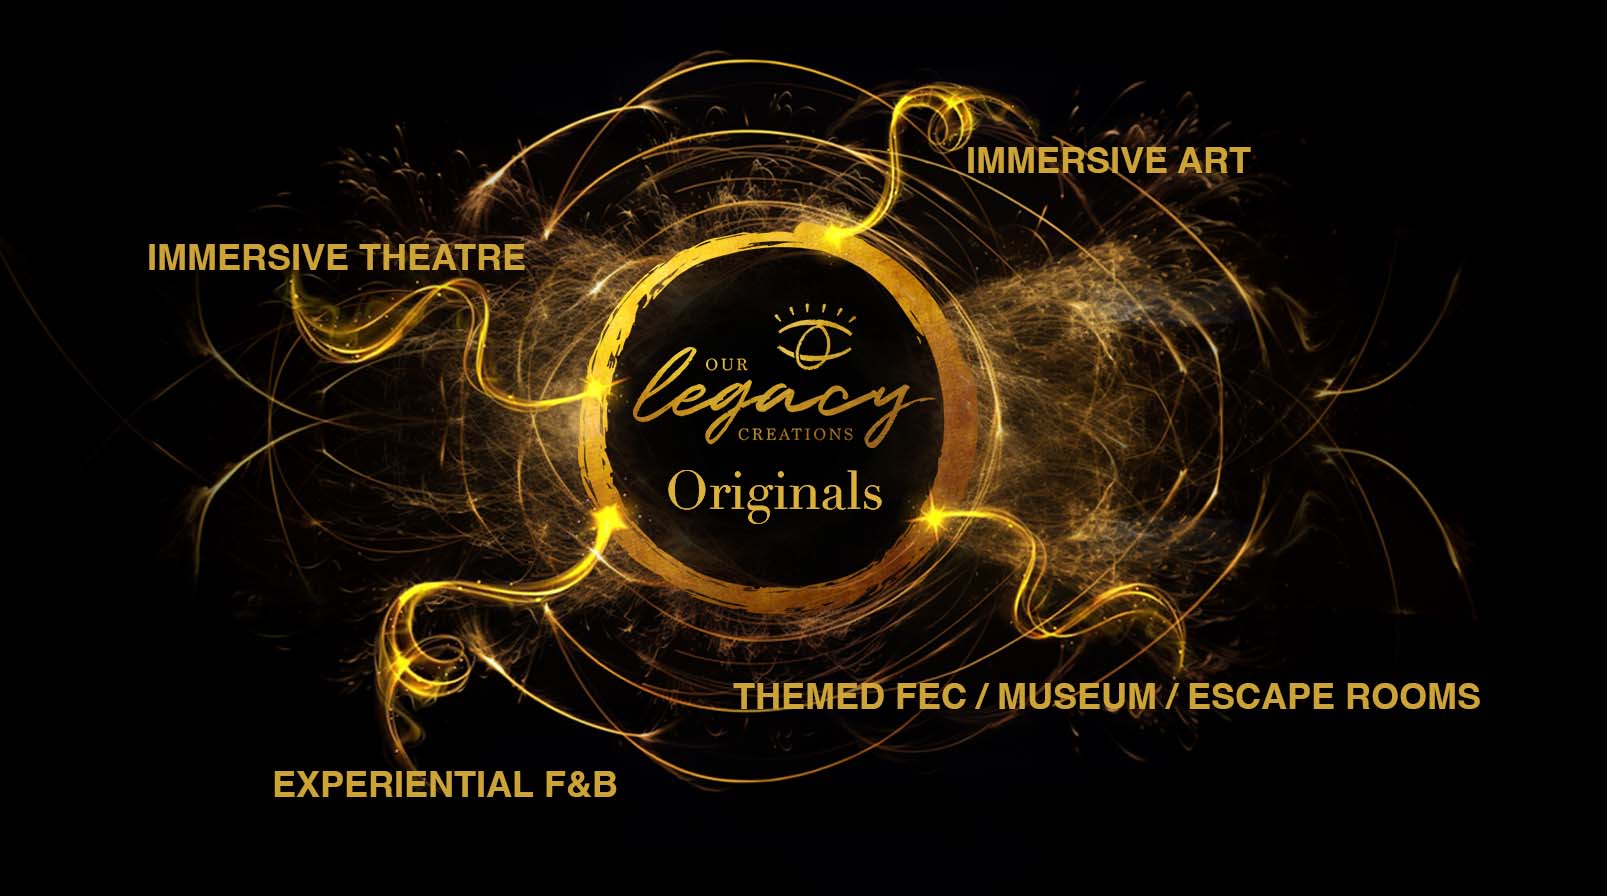 A golden, wispy circle with the displaying the 4 sectors of OLC orginal programing. Immersive Theatre, Immersive Art, Experiential F&B, and Themed FEC / Museum/Escape Rooms